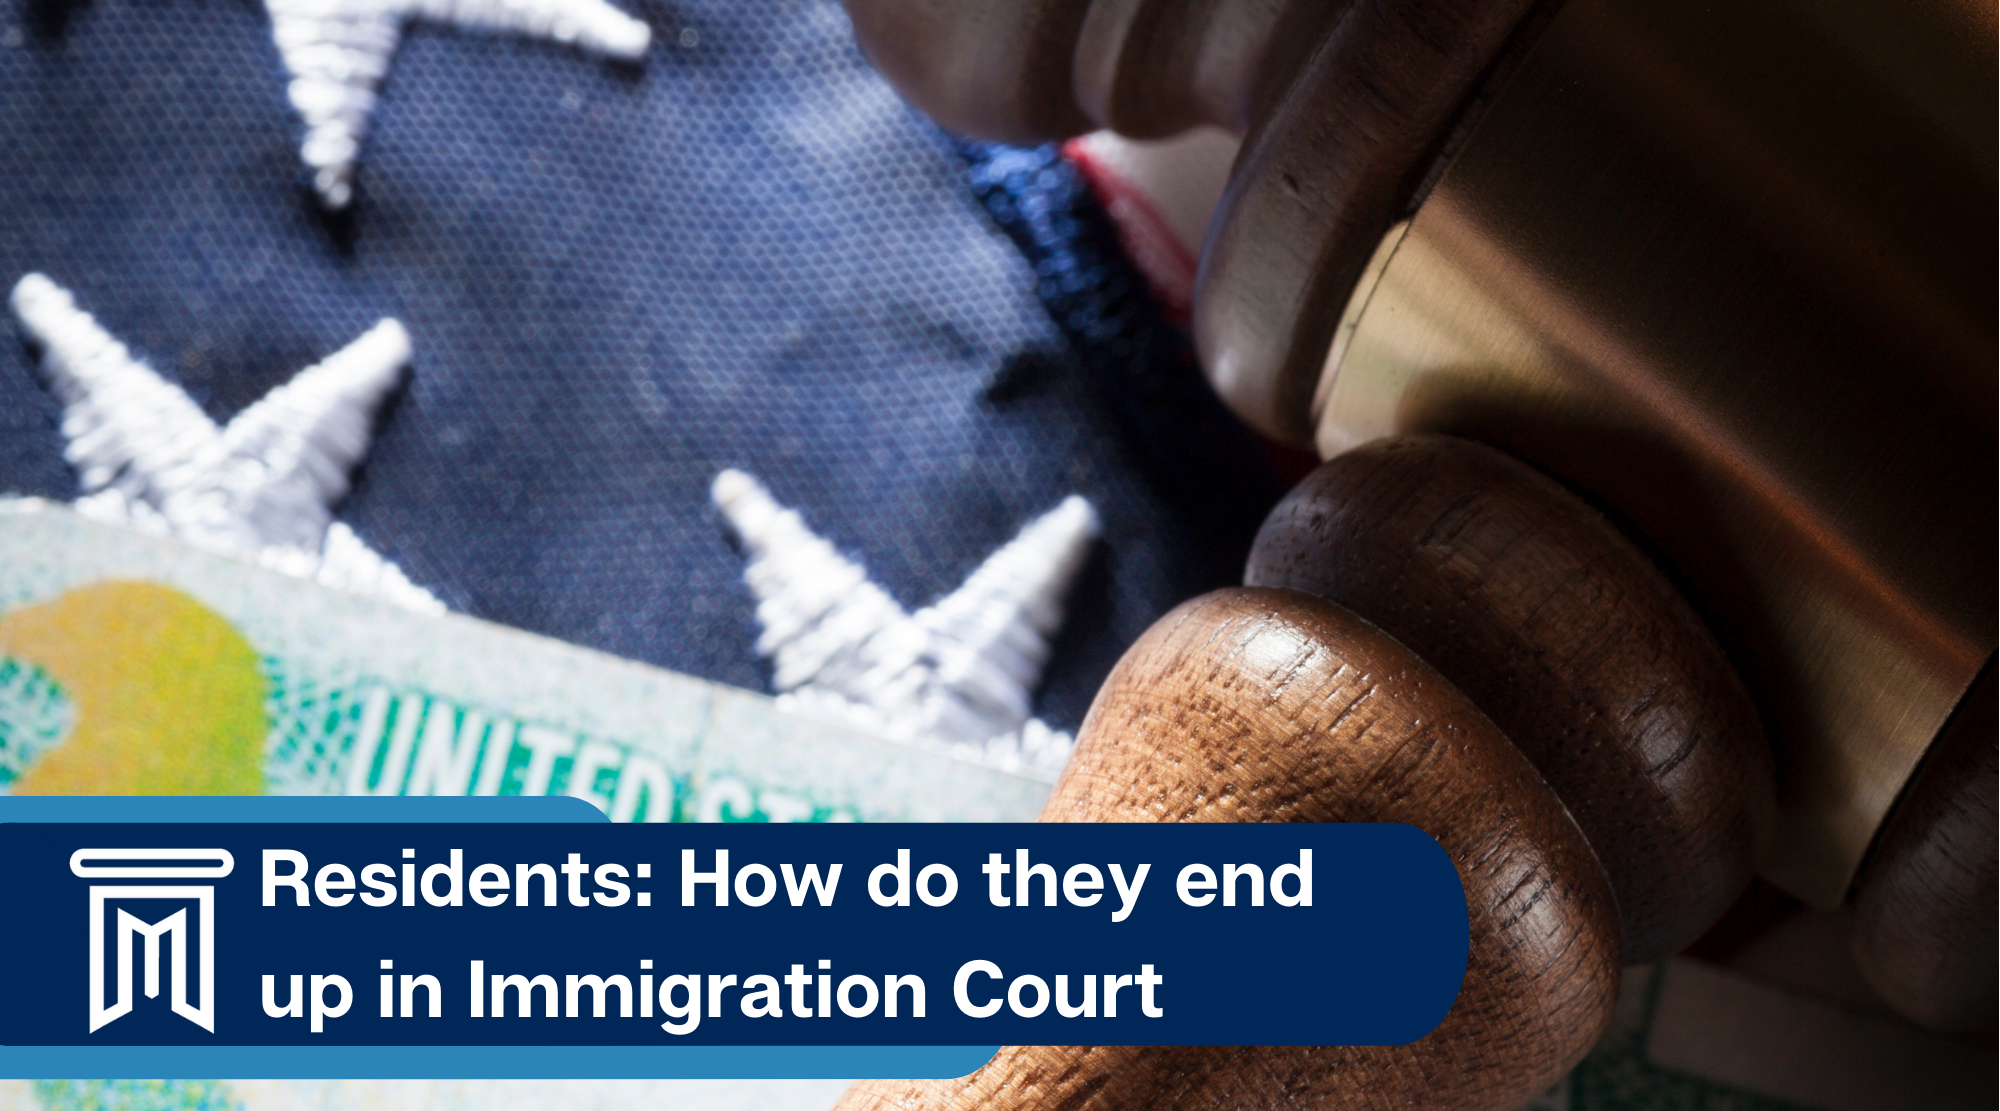 Residents: how do they end up in immigration court